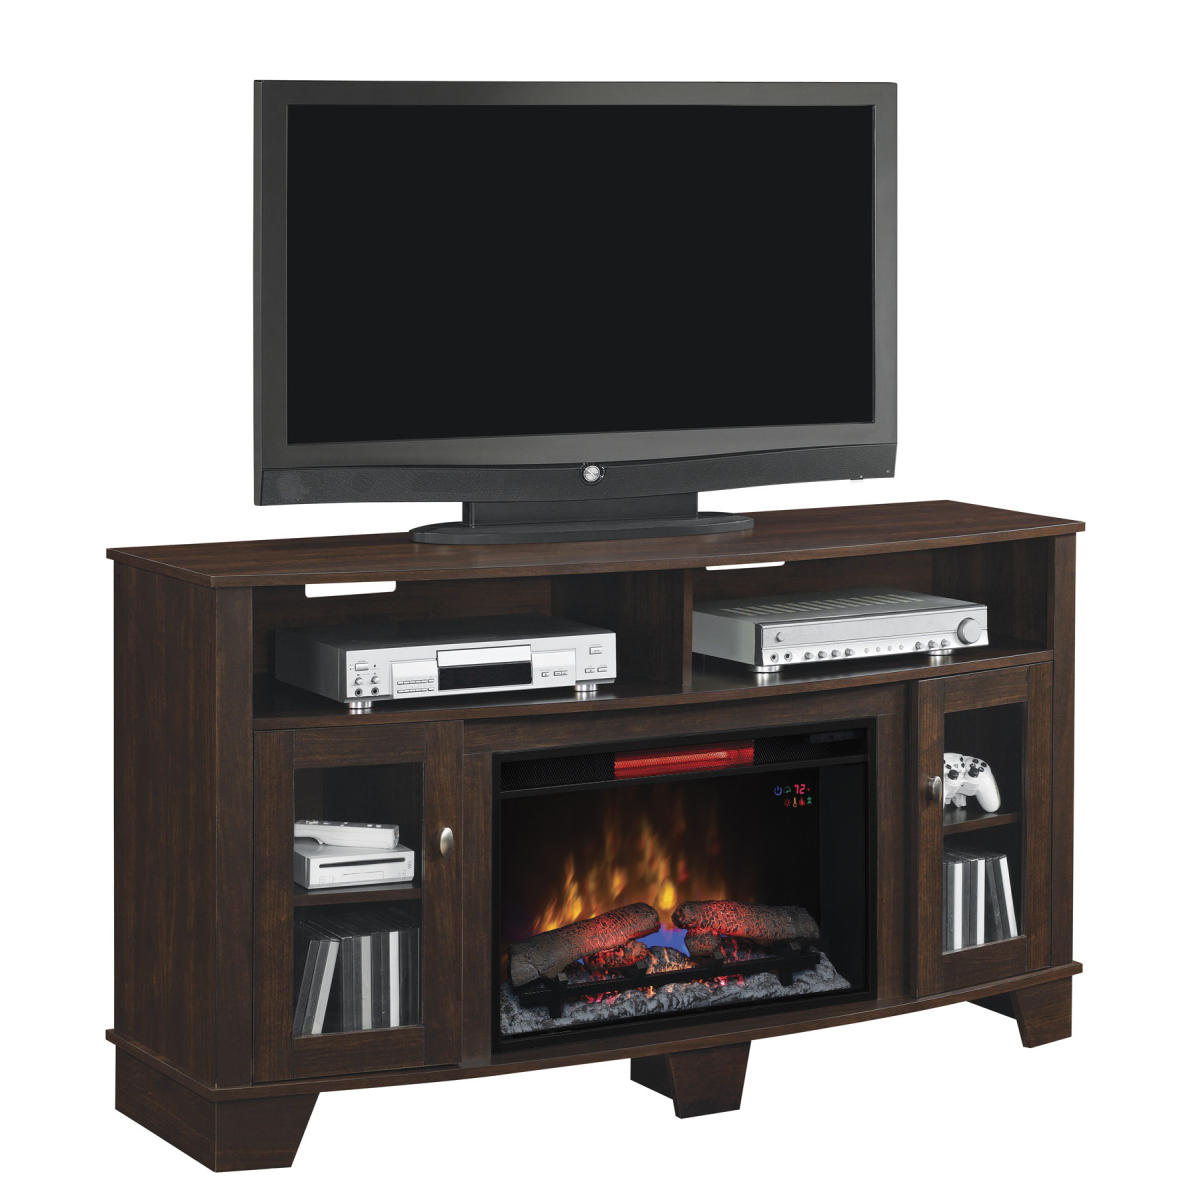 La Salle TV Stand with Fireplace